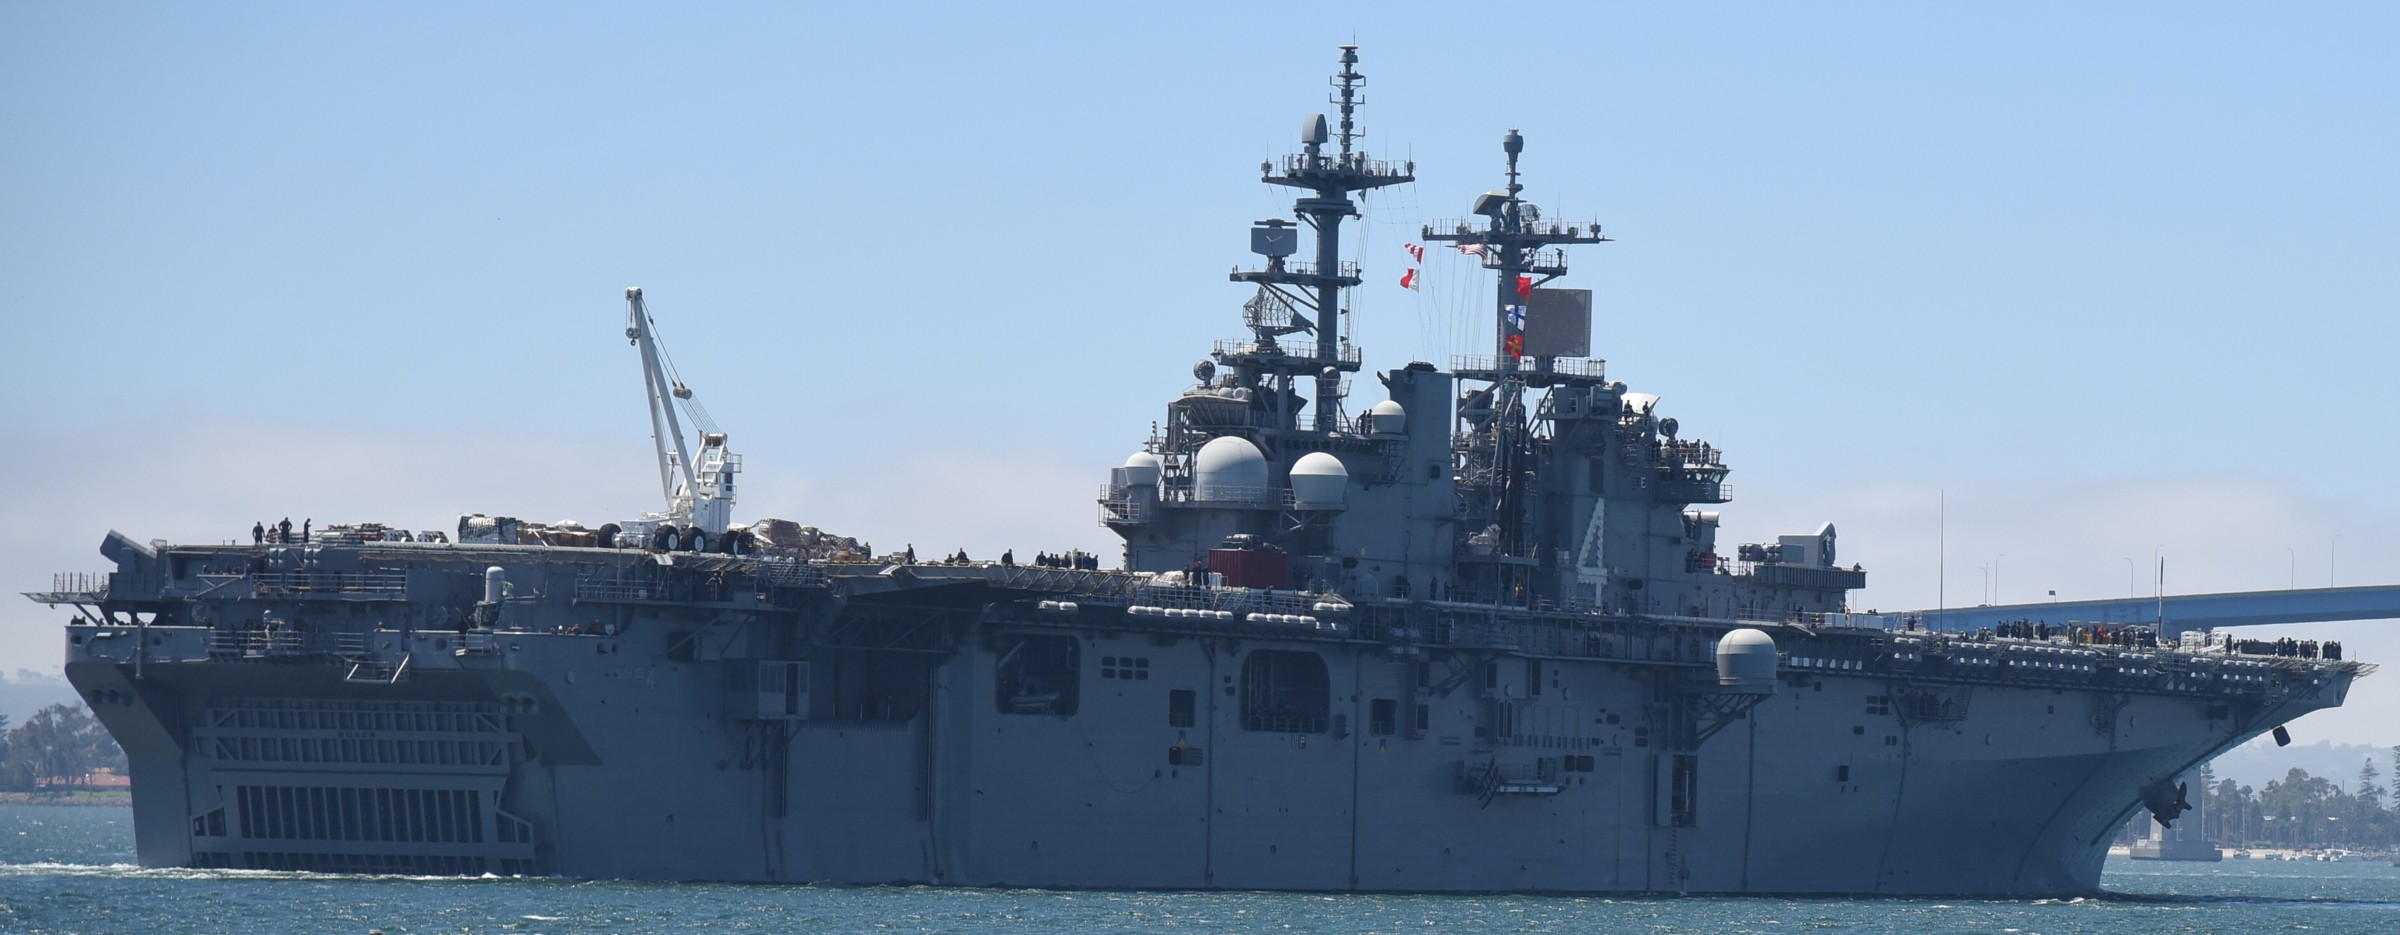 lhd-4 uss boxer wasp class amphibious assault ship landing helicopter dock us navy departing san diego trials 158